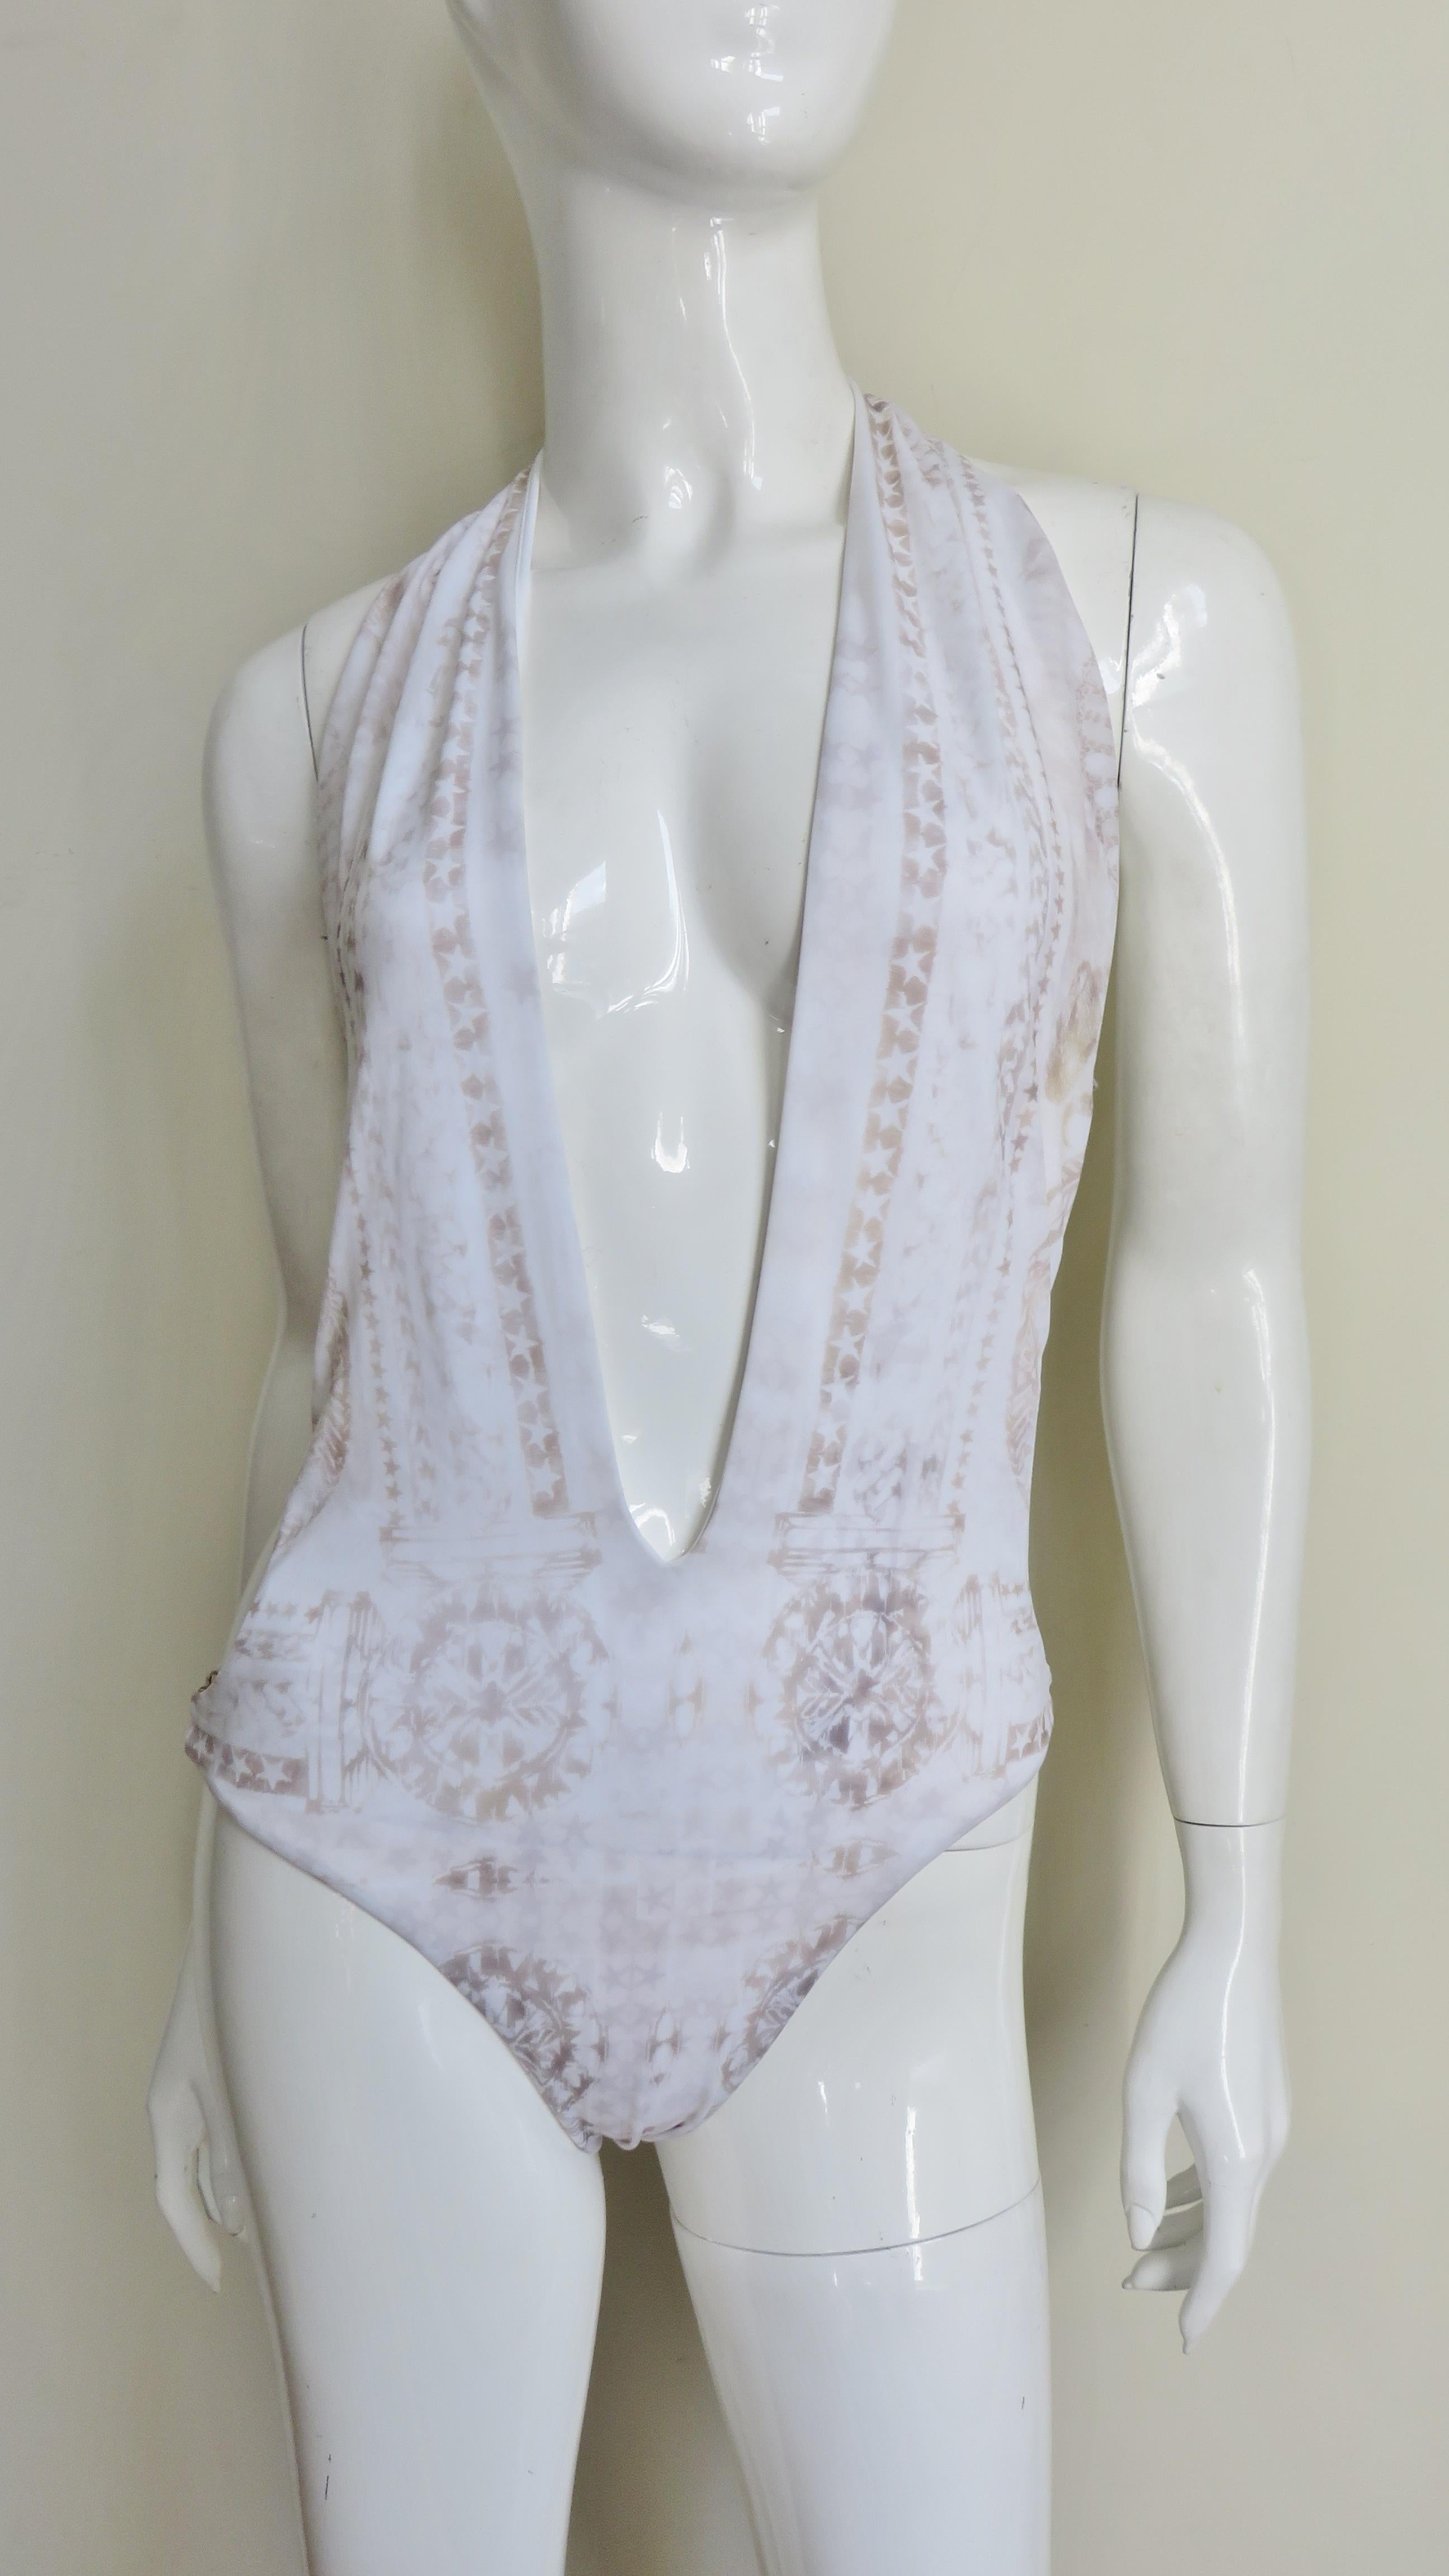 A fabulous plunging Balmain swimsuit in white with a grey abstract geometric pattern.  It has a low plunging neckline which close at the back of the neck with a gold metal clasp.  There are ties a the side bust that tie in the back and the same